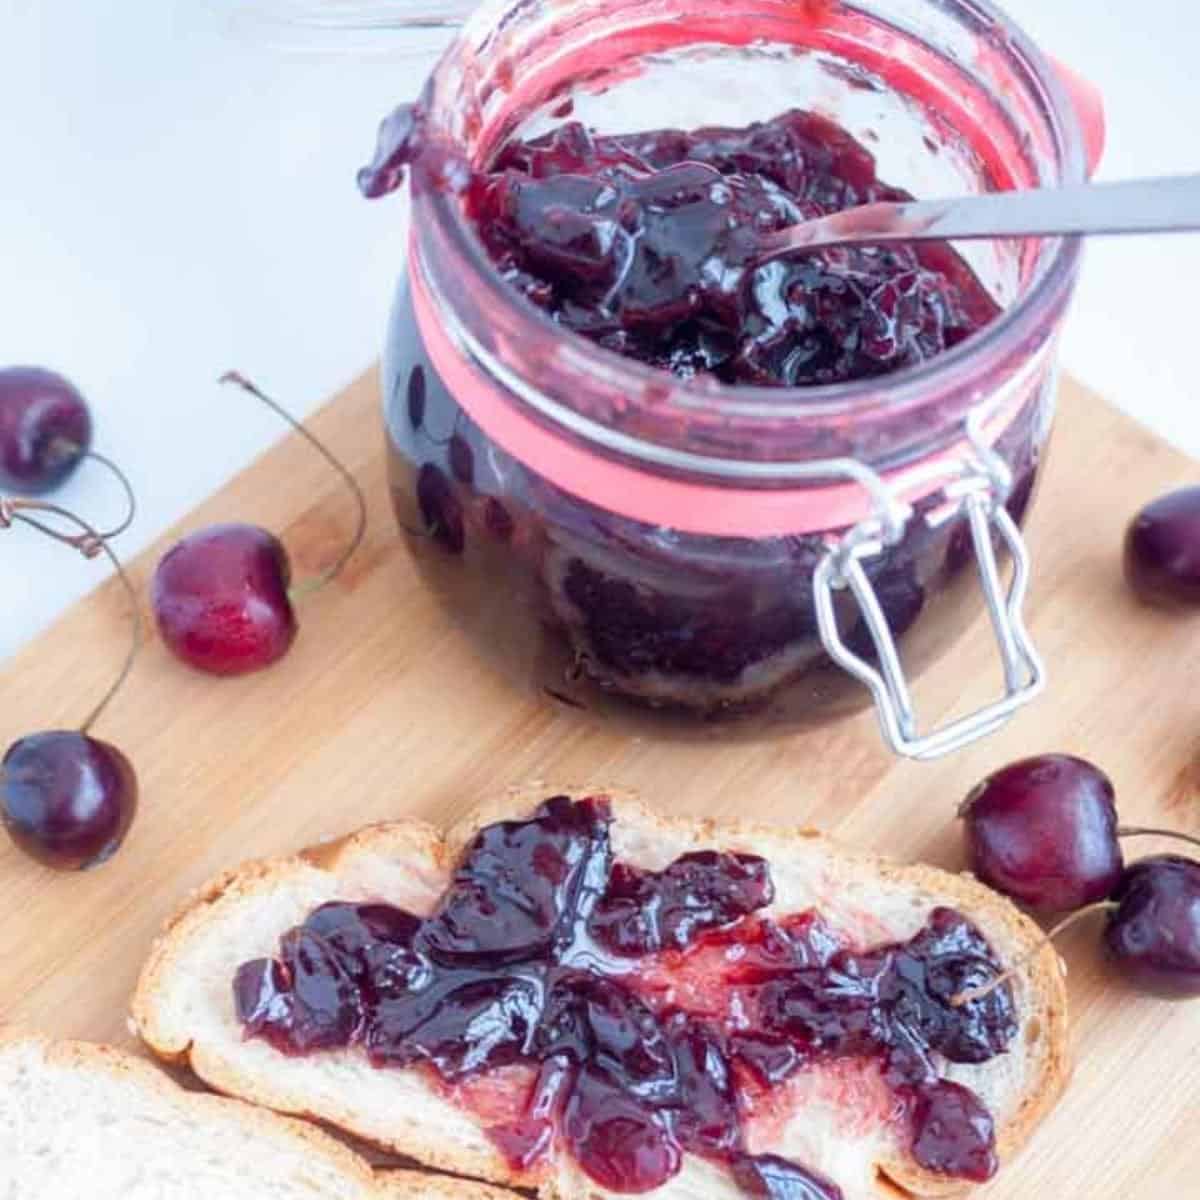 A slice of bread with cherry jam.